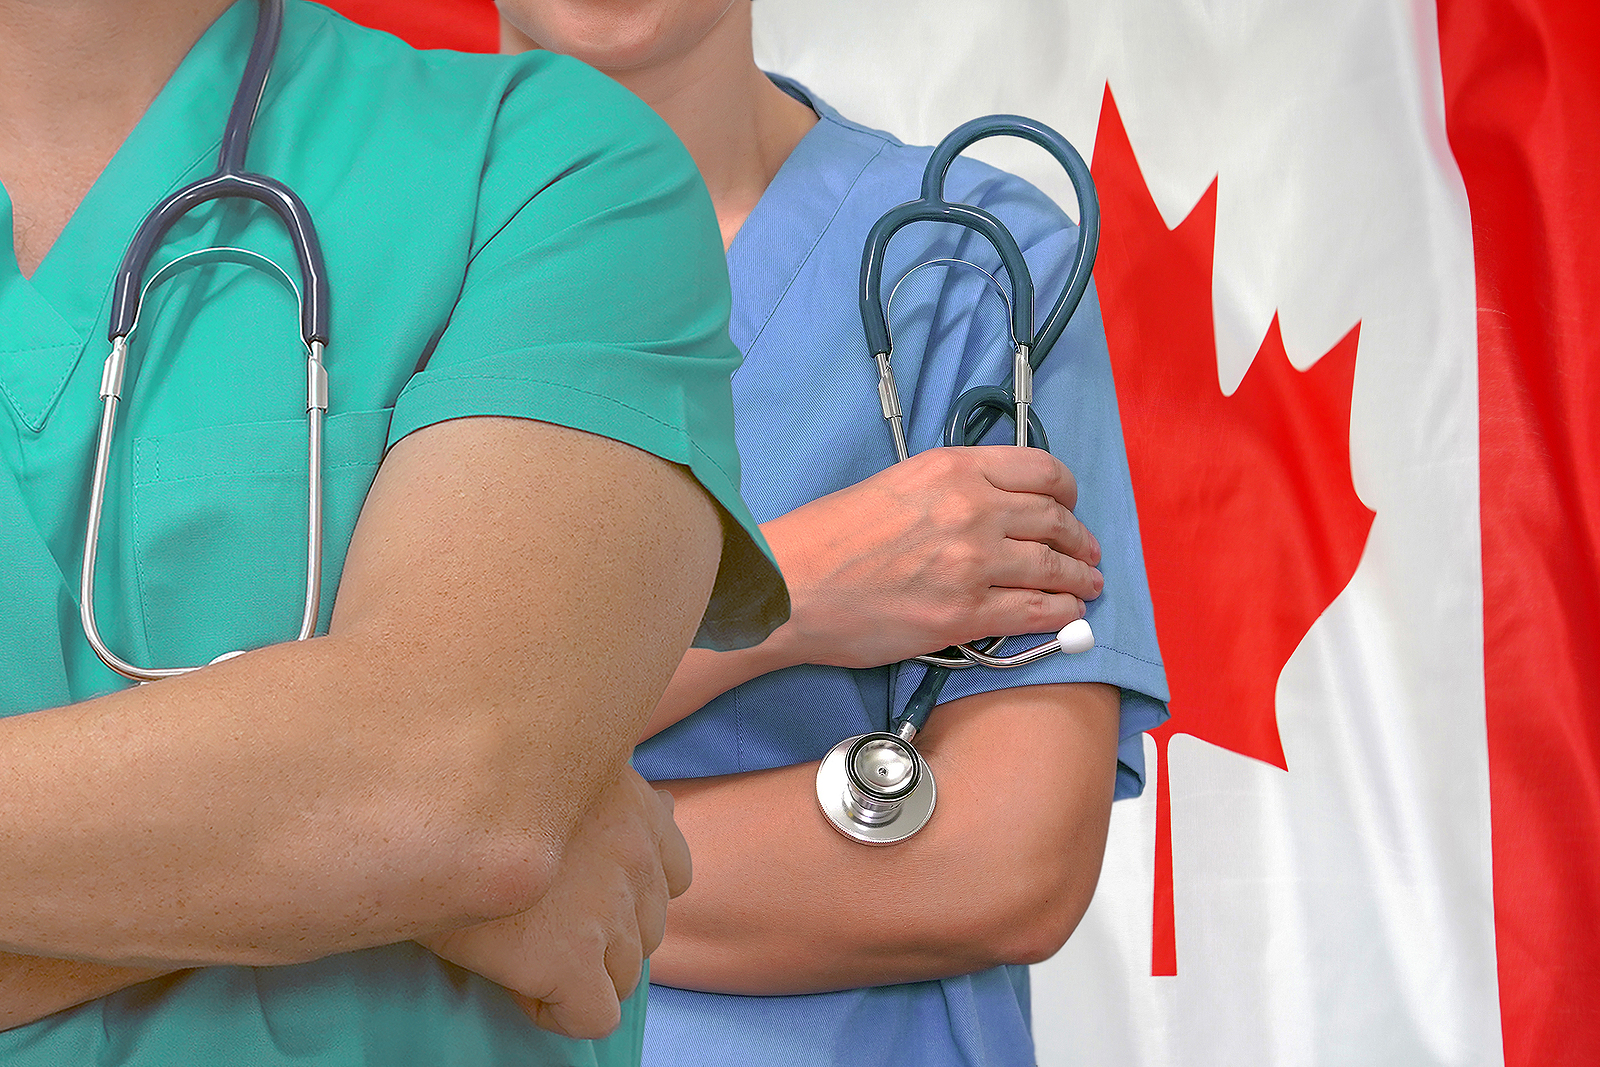 Canada has provided ways to fill job vacancies in the health sector by offering pathways to permanent residency for international nurses